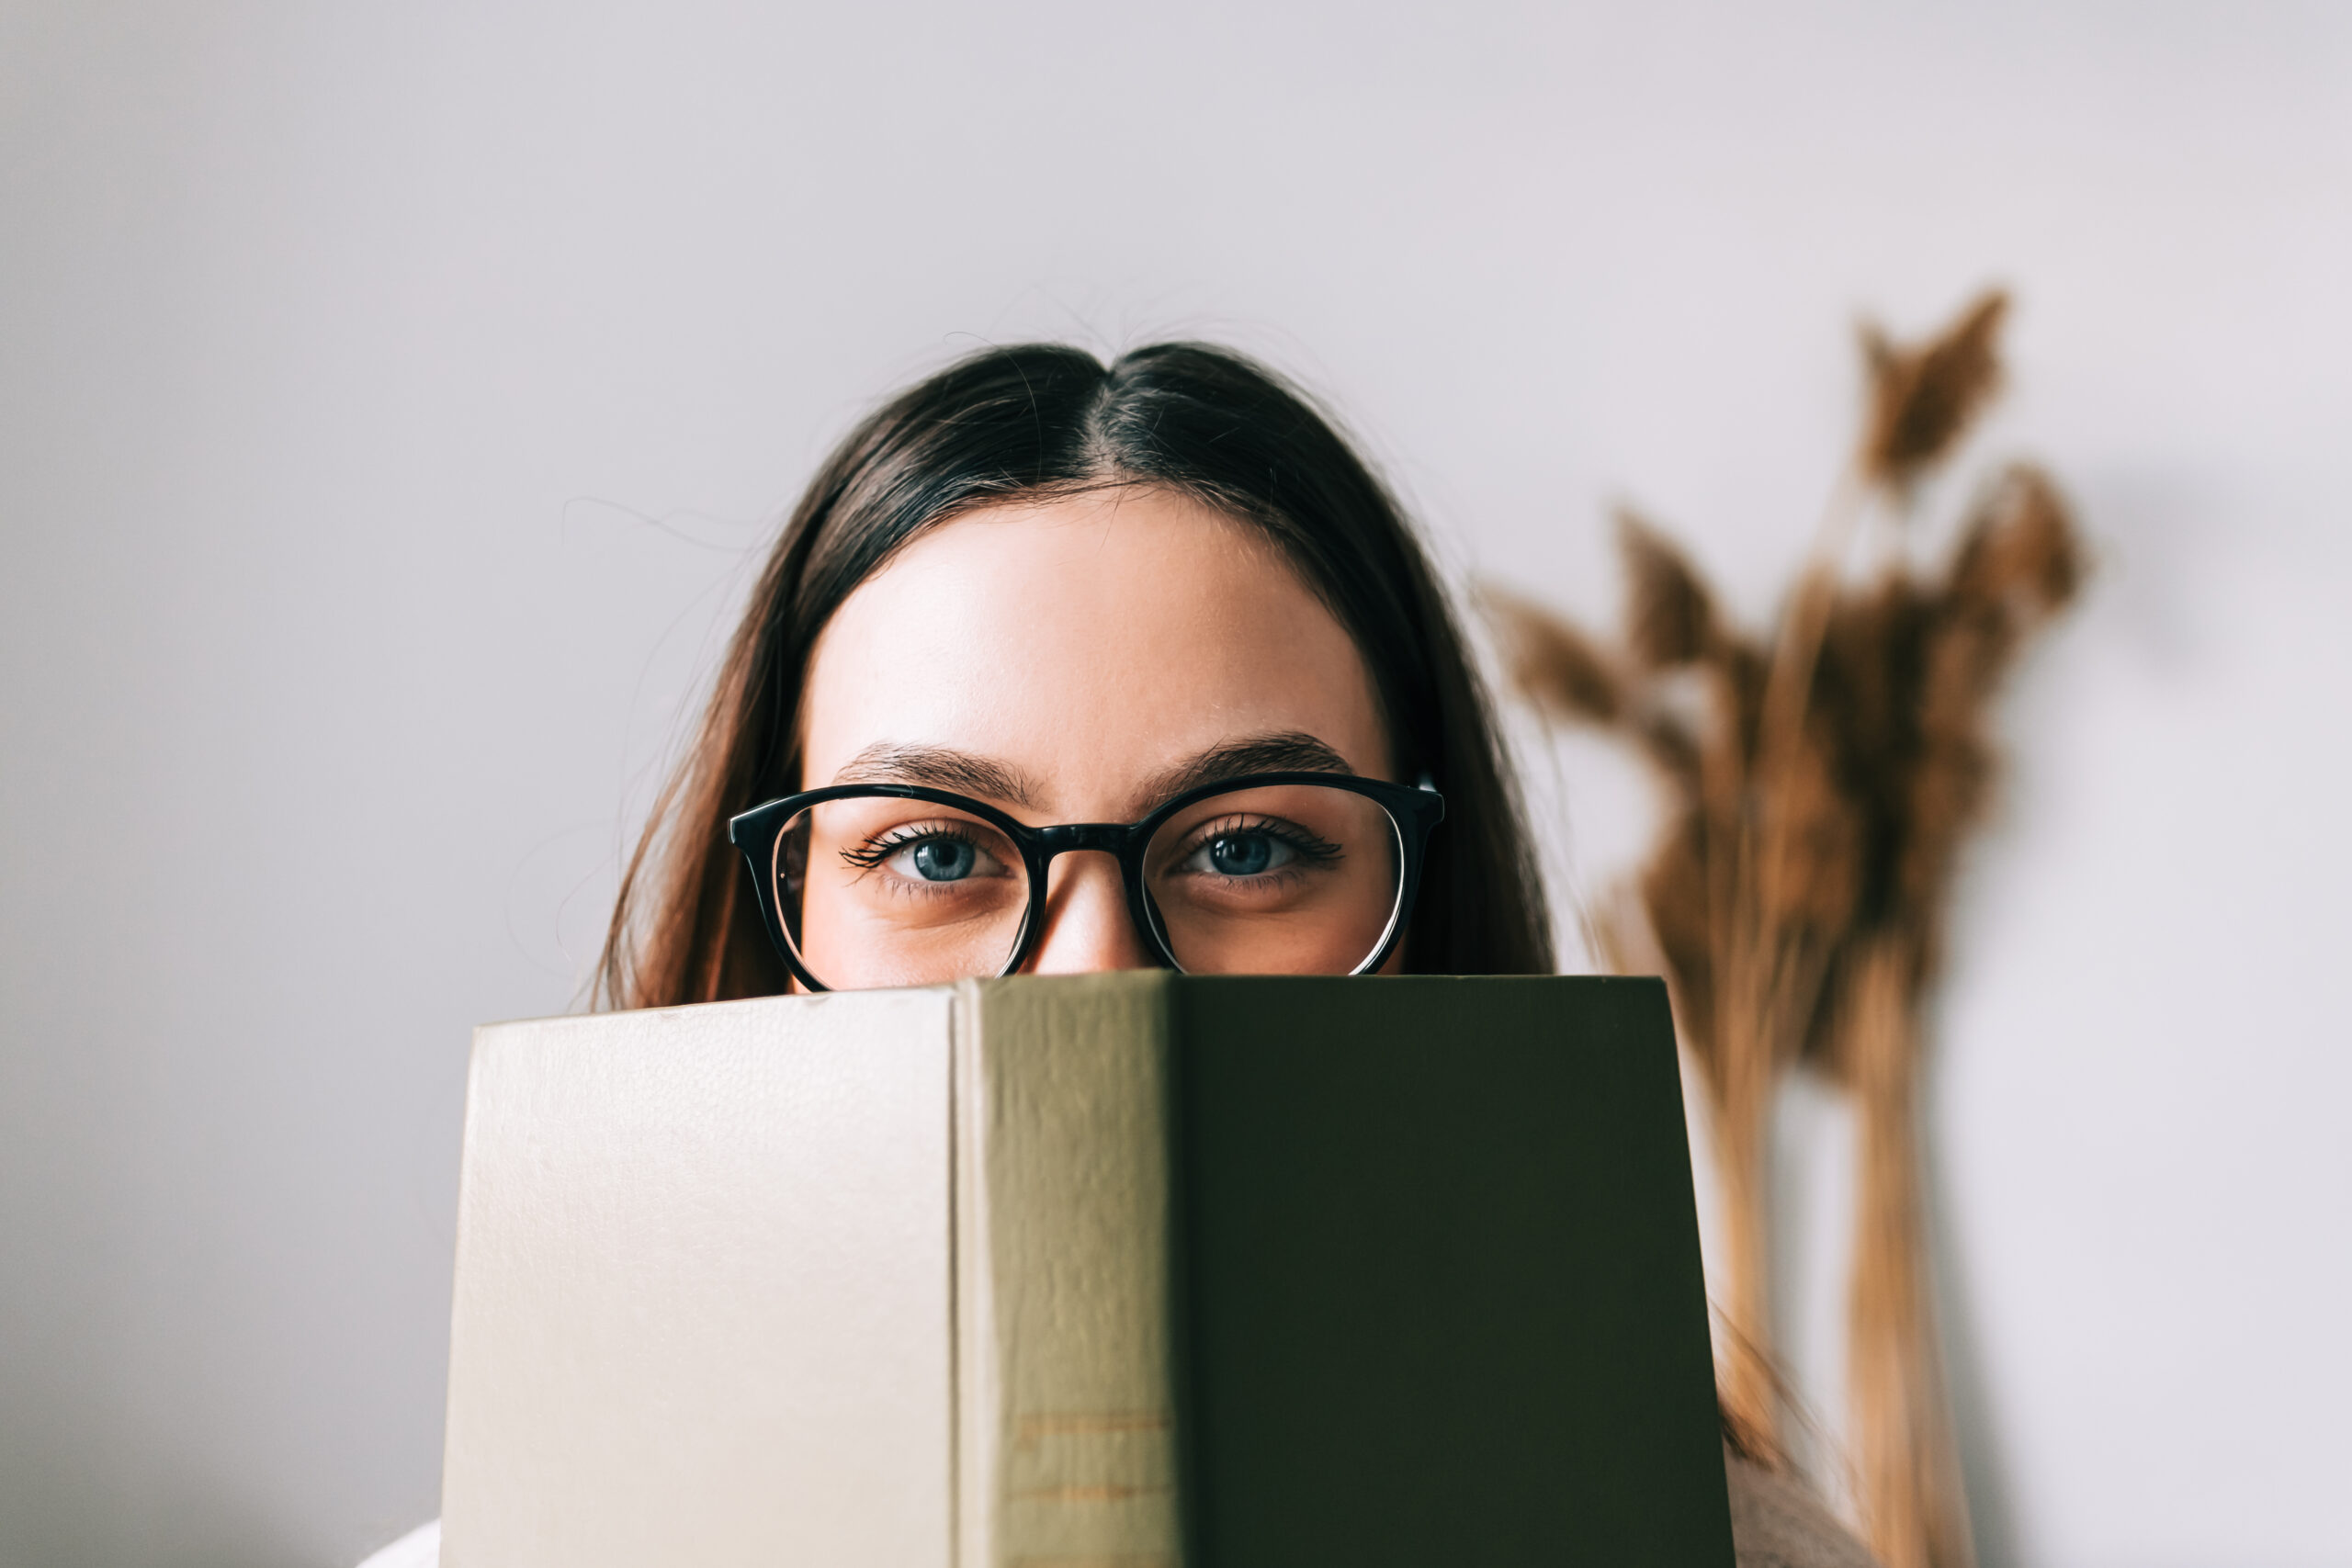 Woman with glasses hiding behind a book